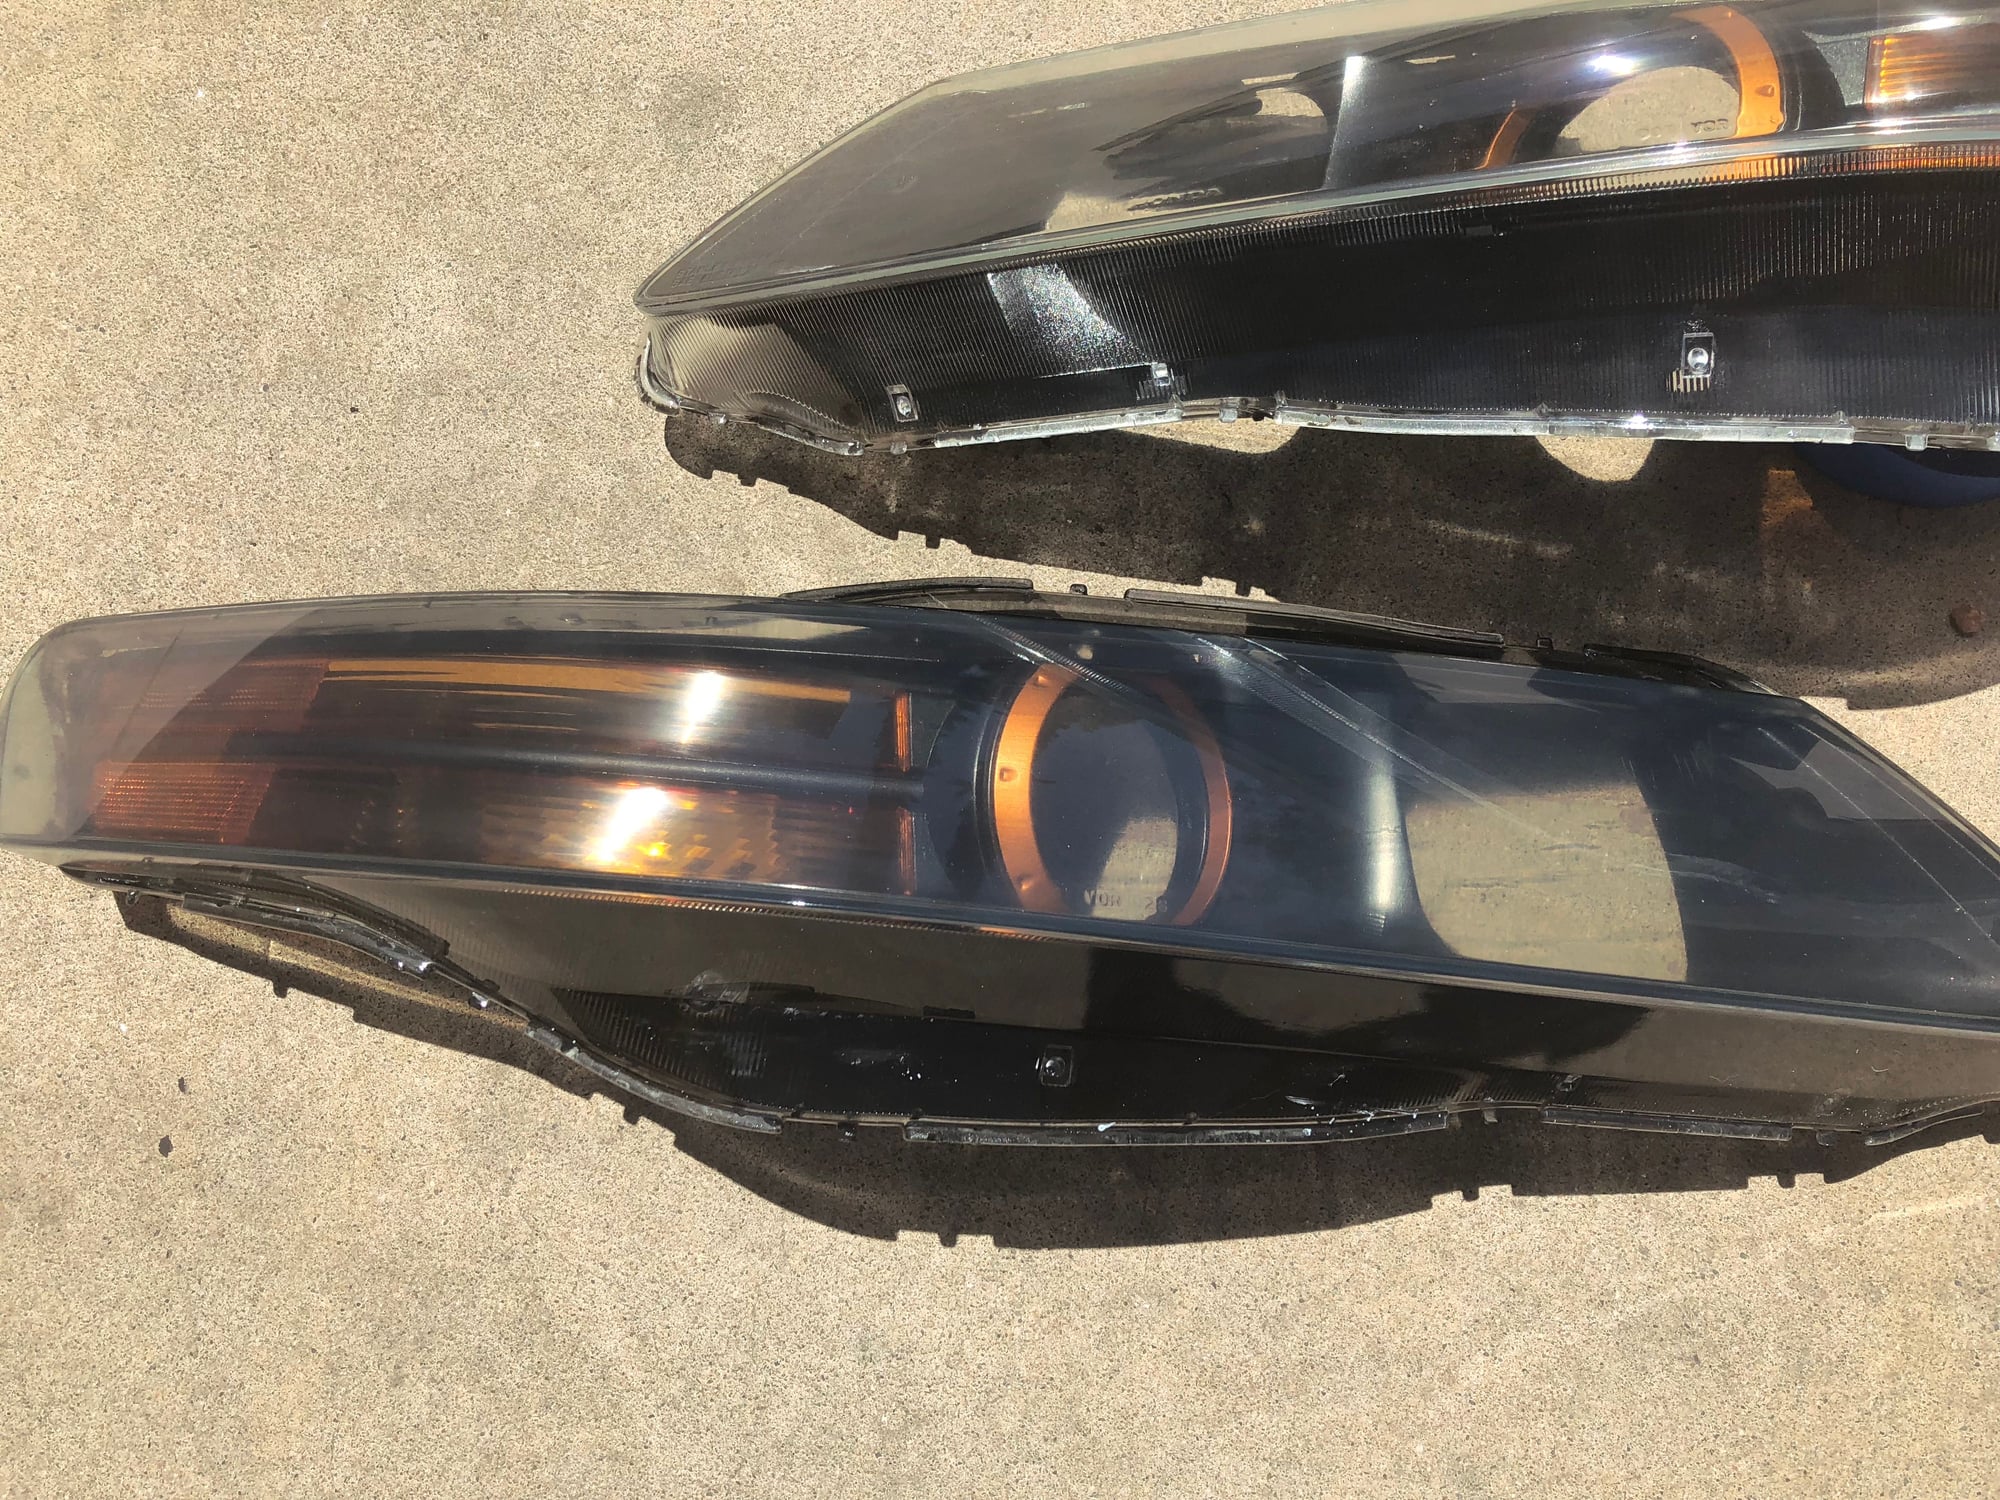 Lights - SOLD: 04-06 Acura TL Headlights (Blacked out and slightly tinted) - Used - 2004 to 2008 Acura TL - Peoria, AZ 85345, United States